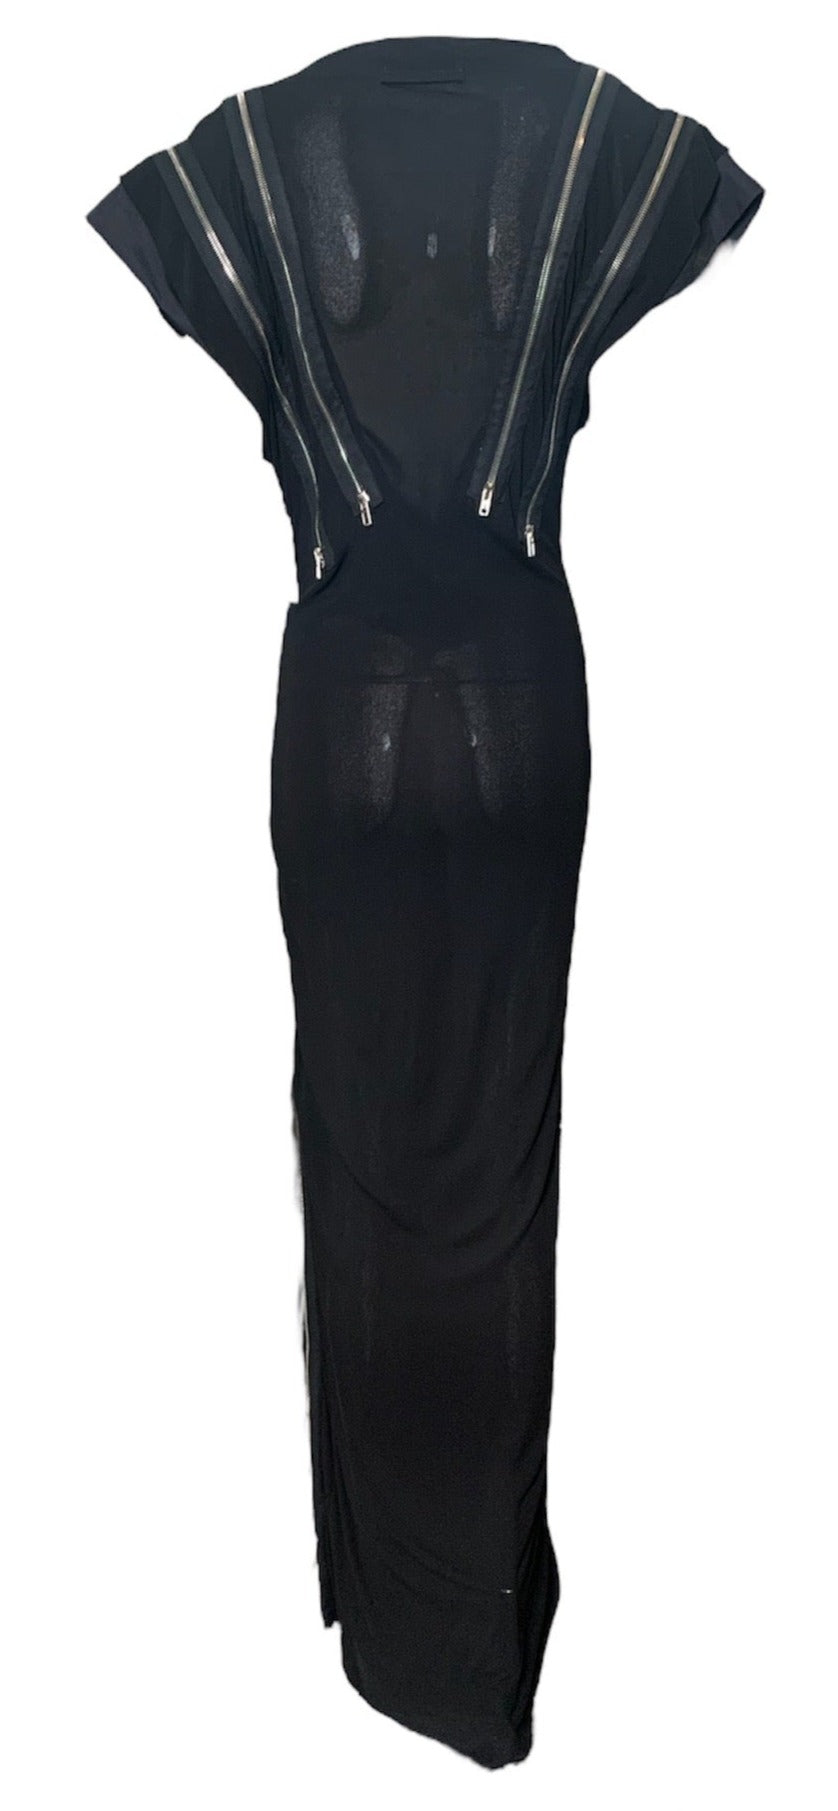  Jean Paul Gaultier  2000s Black and Silver Zipper Jersey Gown  BACK 3 of 9